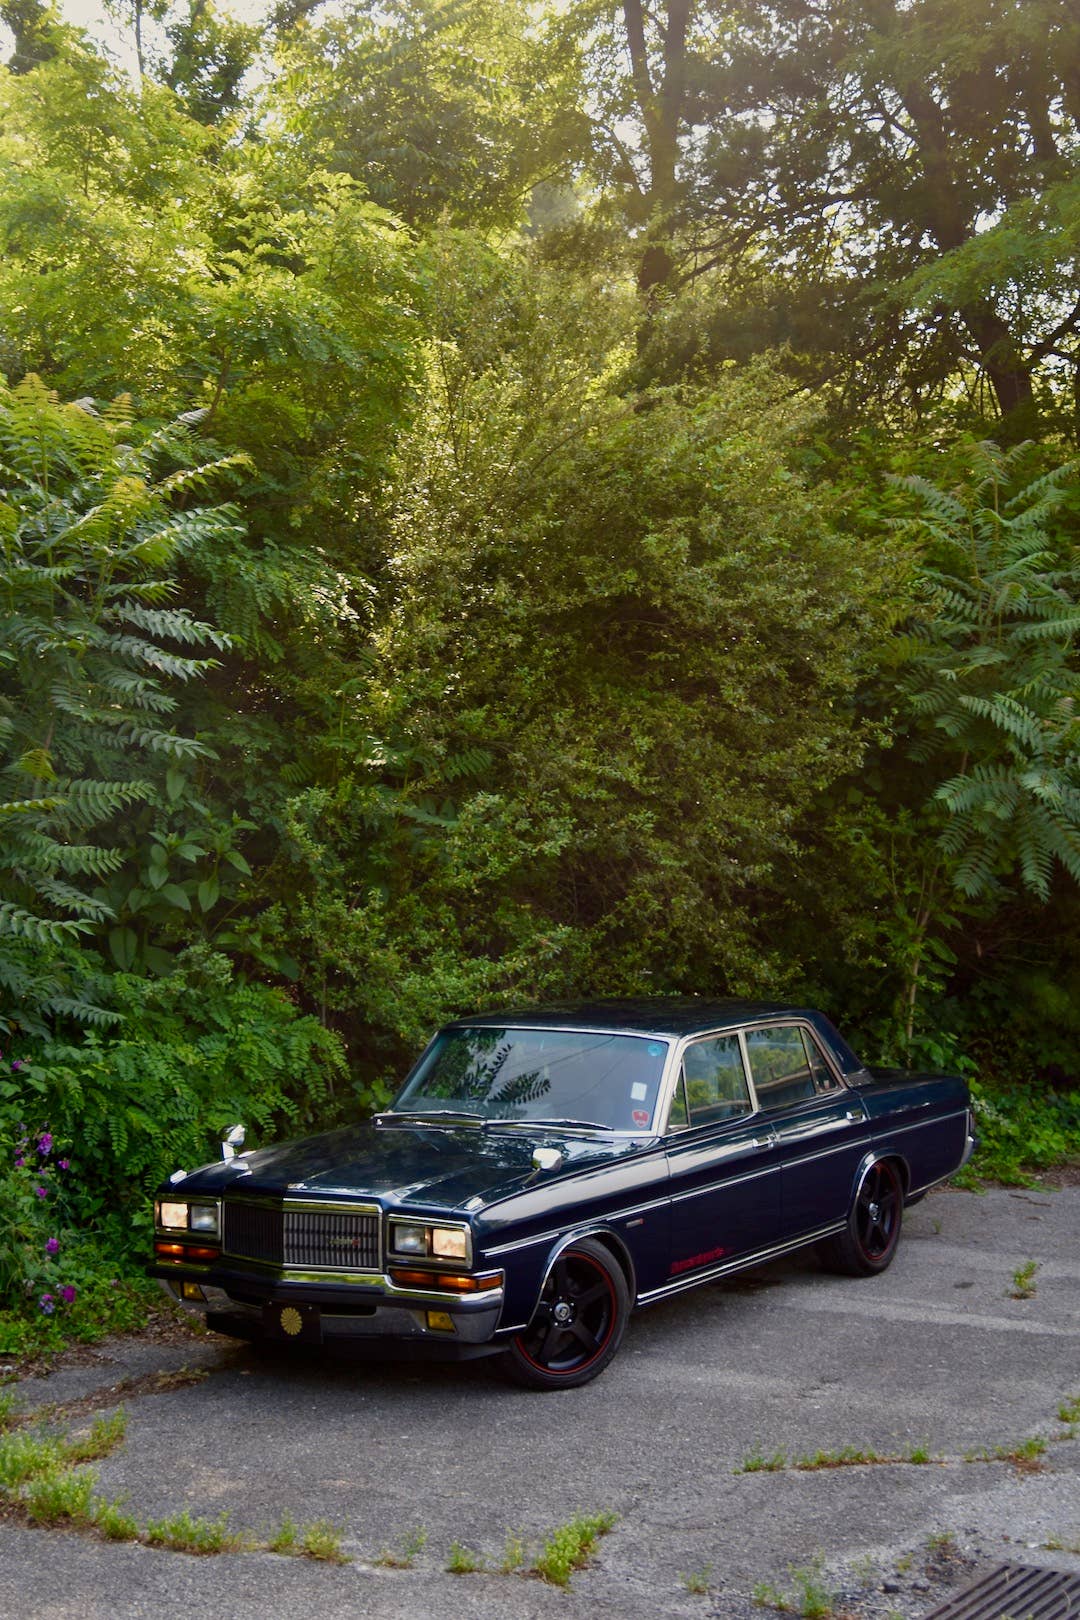 1989 Nissan President with a backdrop of greenery